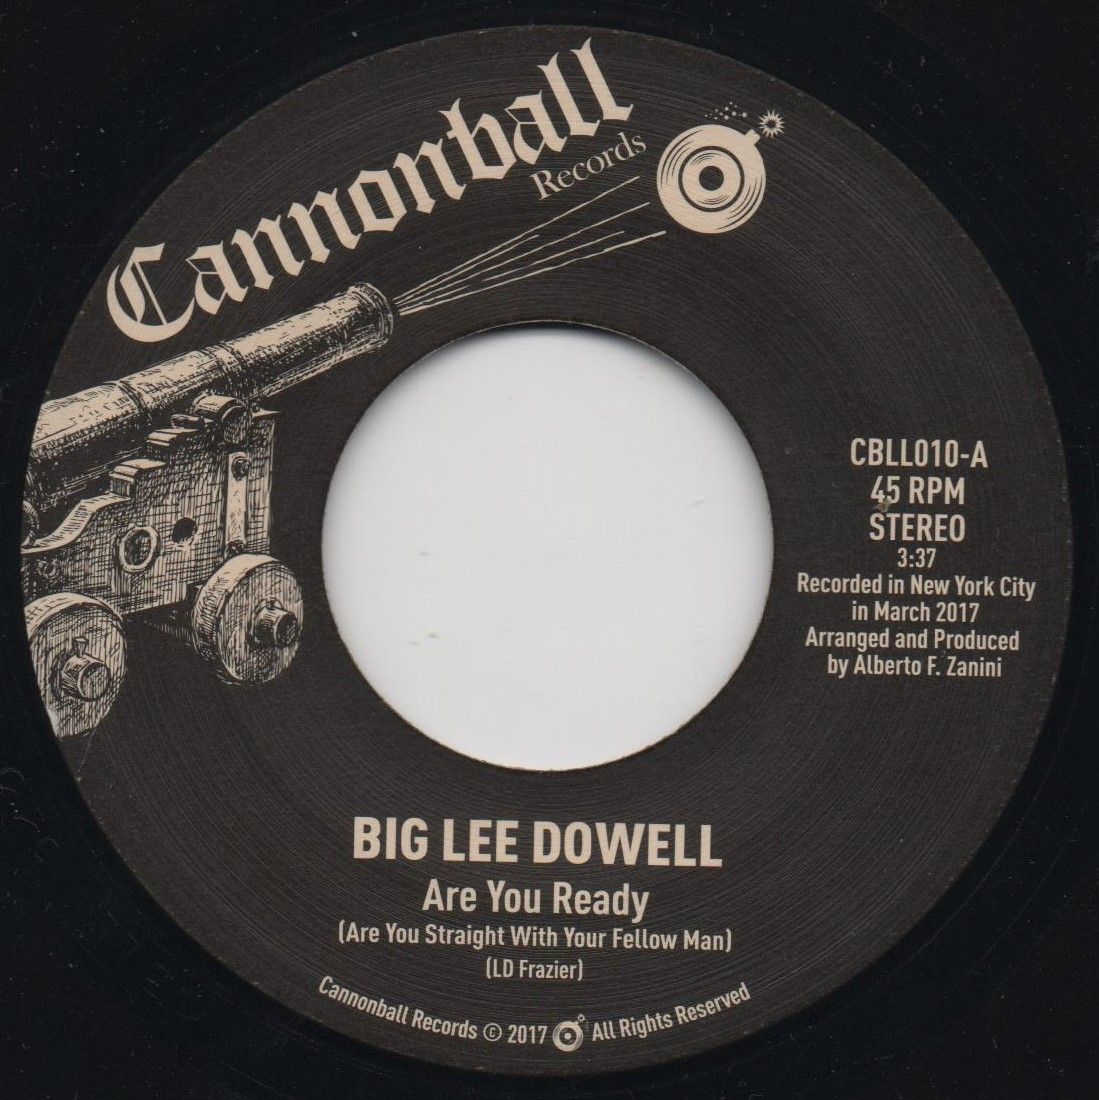 BIG LEE DOWELL - ARE YOU READY